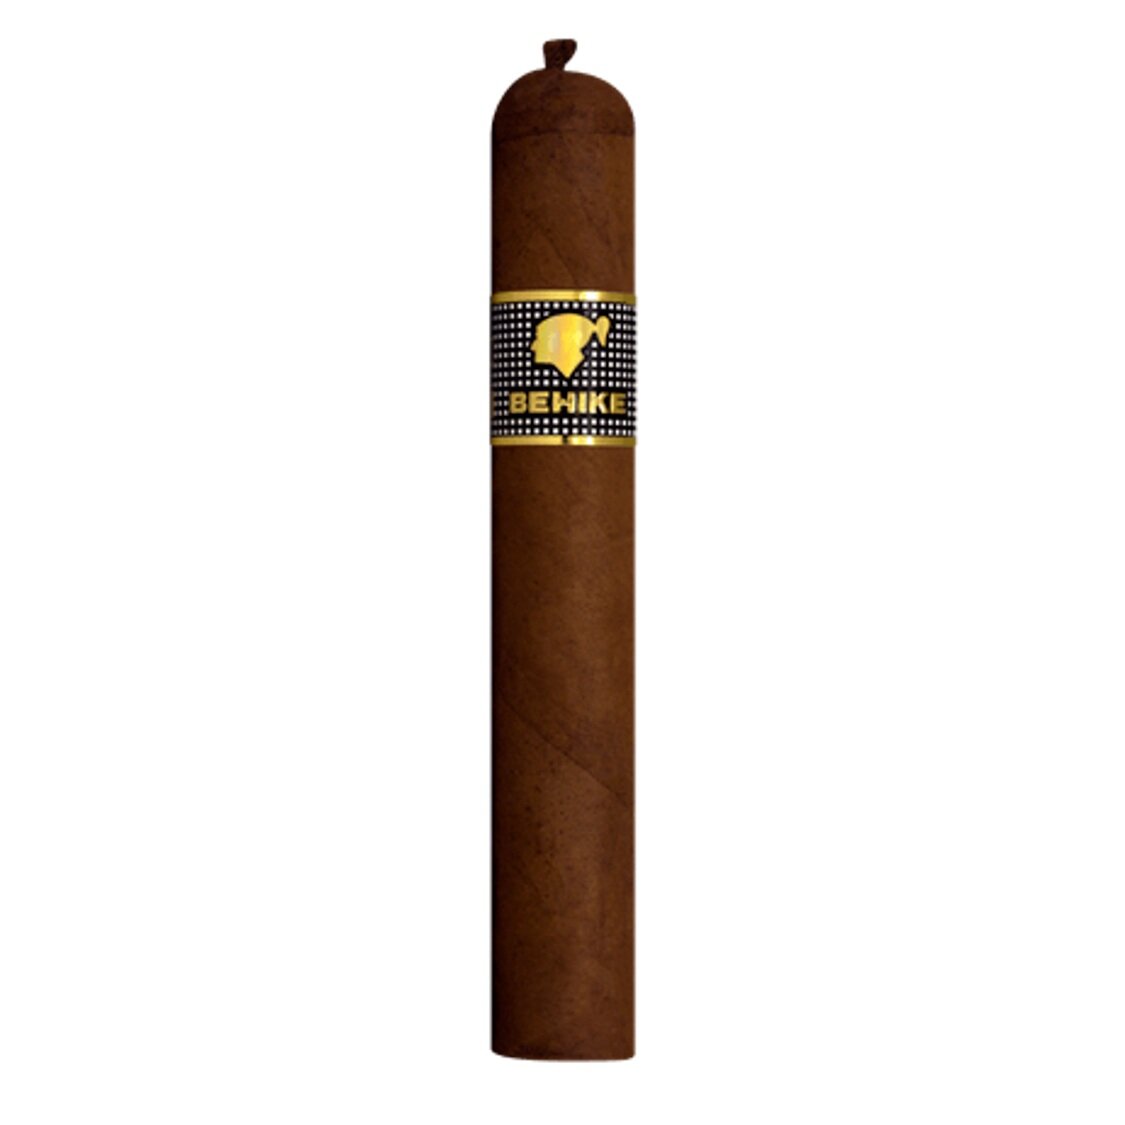 House of Grauer Cohiba Behike 54, Price Upon Request